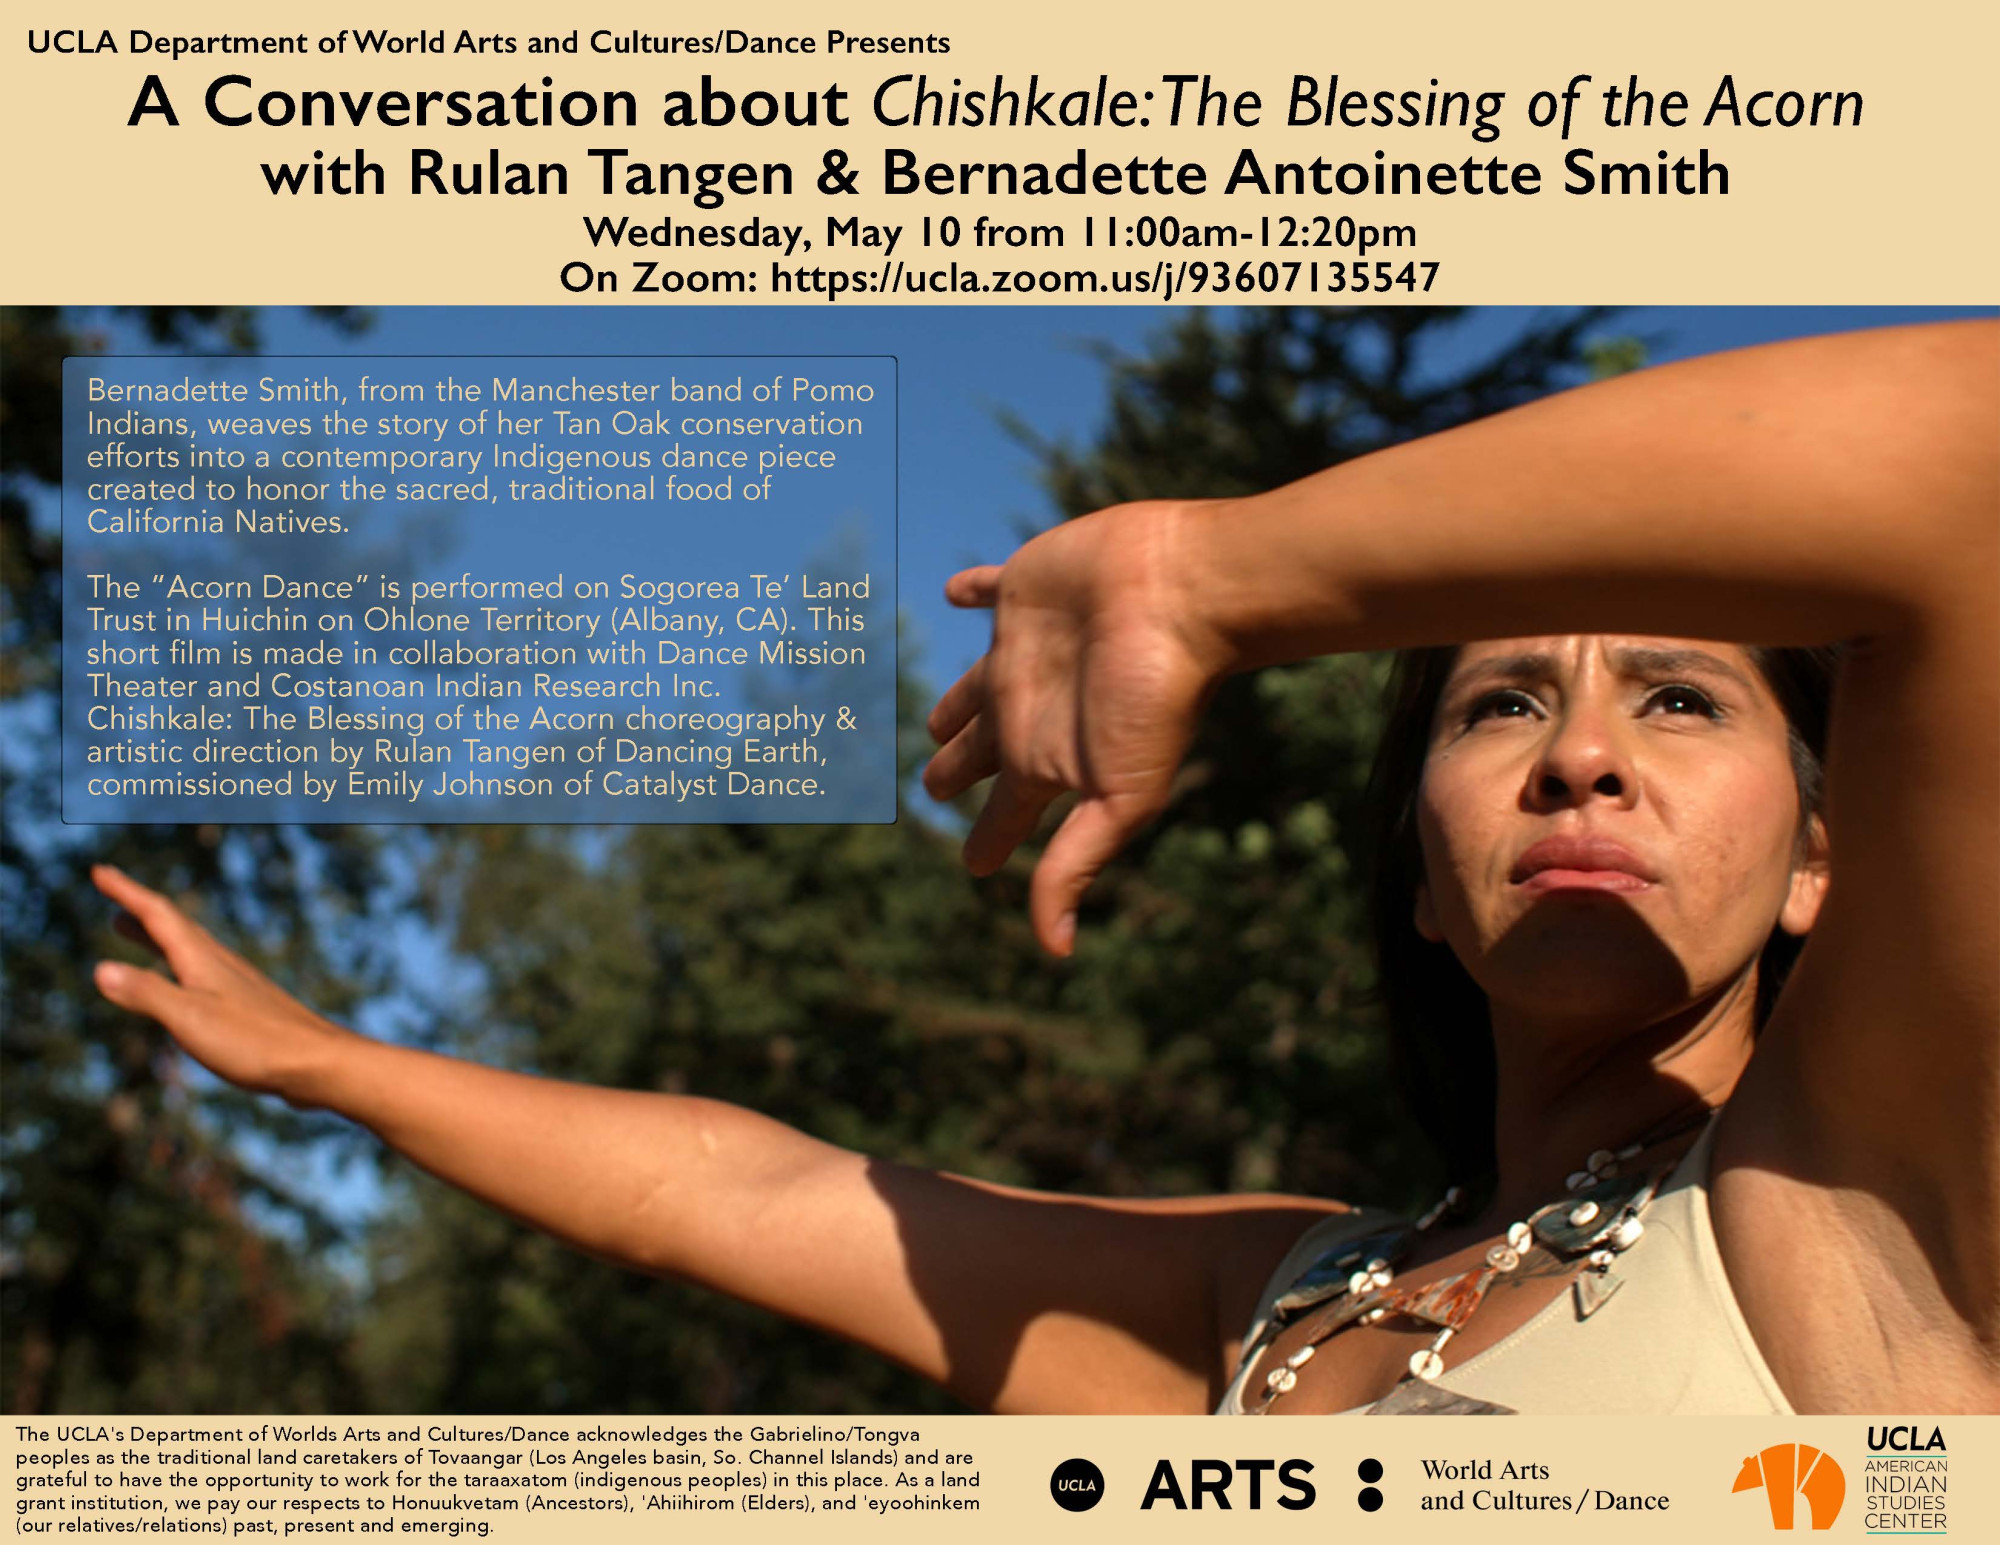 A Conversation about Chishkale:The Blessing of the Acorn with Rulan Tangen & Bernadette Antoinette Smith